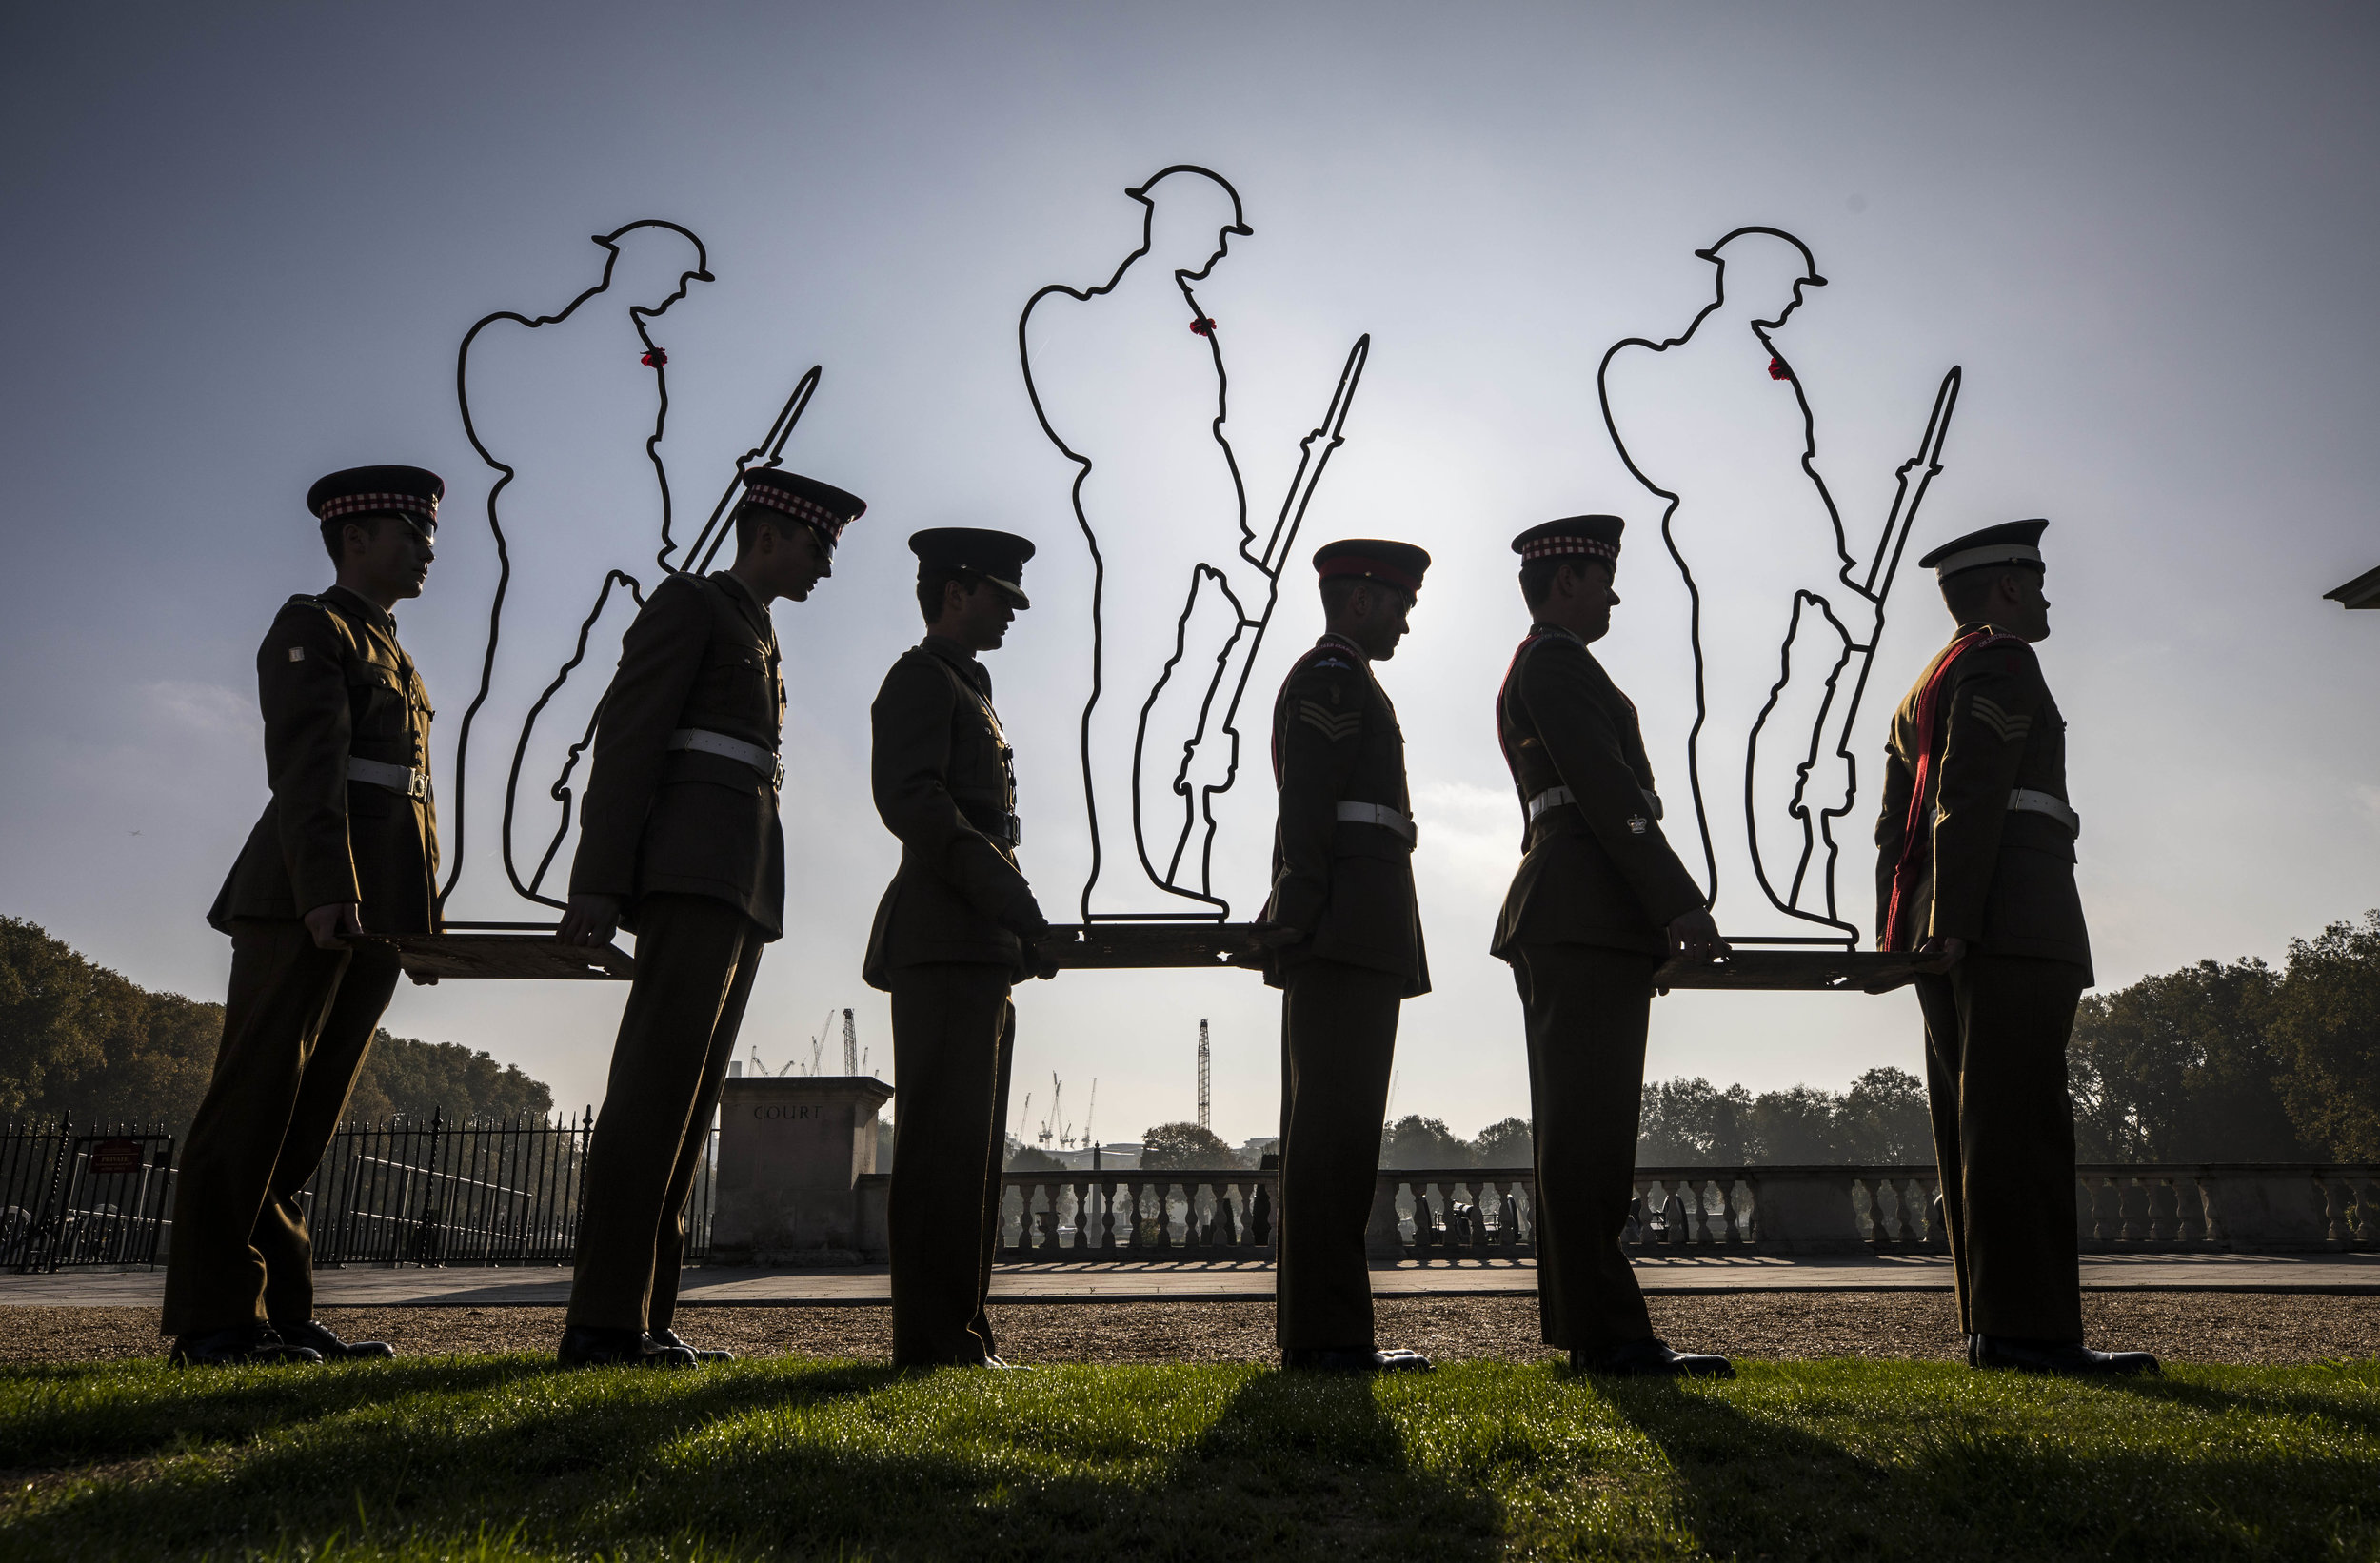  Guardsmen carry some of the "There but not there" World War One silhouettes which are to be placed in the grounds of the Royal Hospital in Chelsea to mark the centenary of the Armistice.

Photo by Richard Pohle, 16 October 2018
 